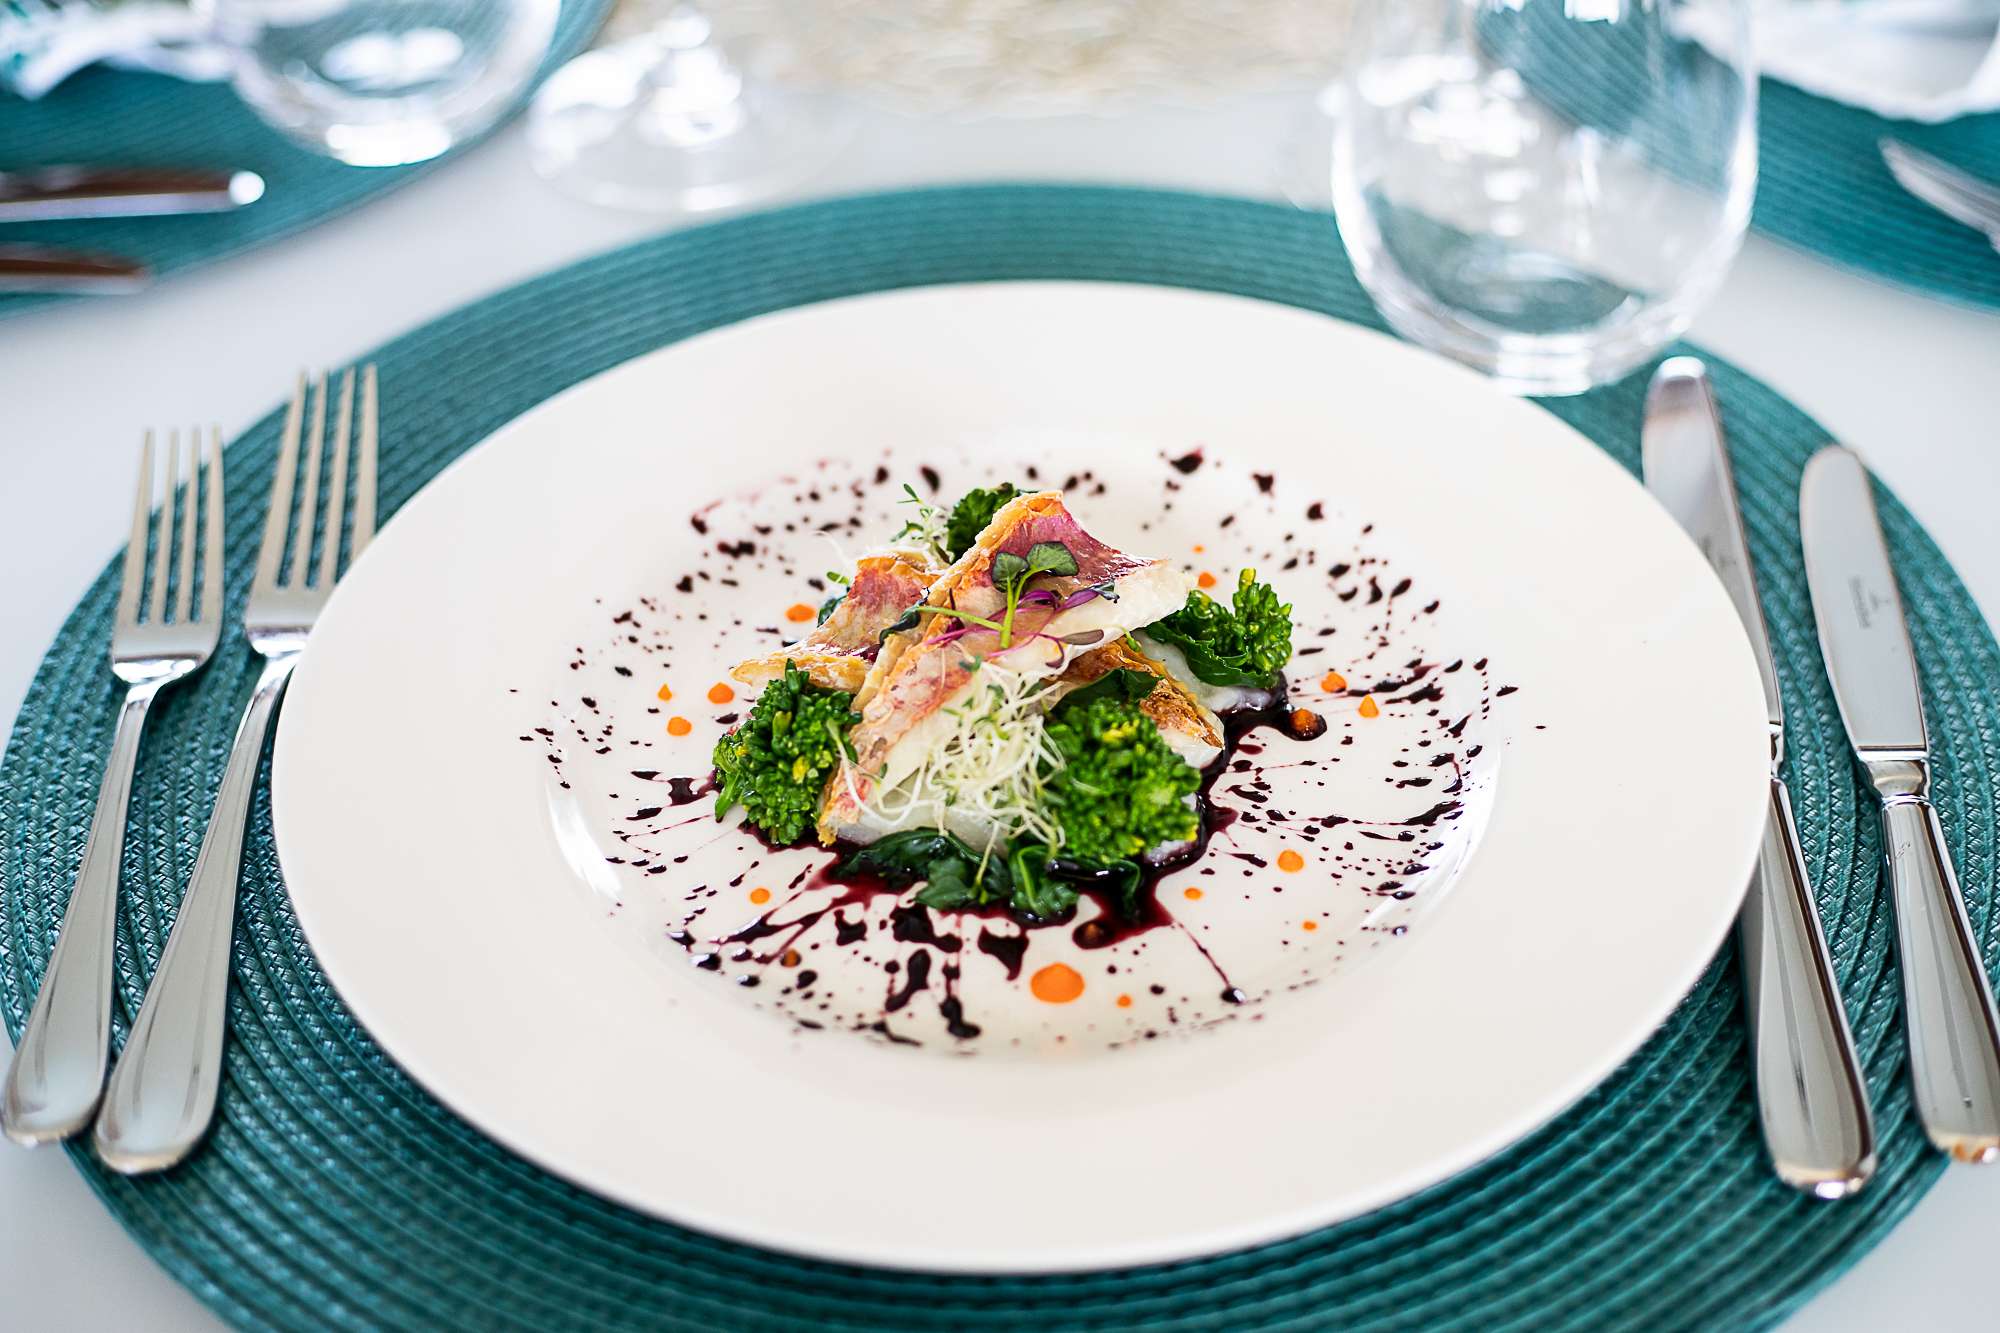 EVEREAST Yacht Charter - Food